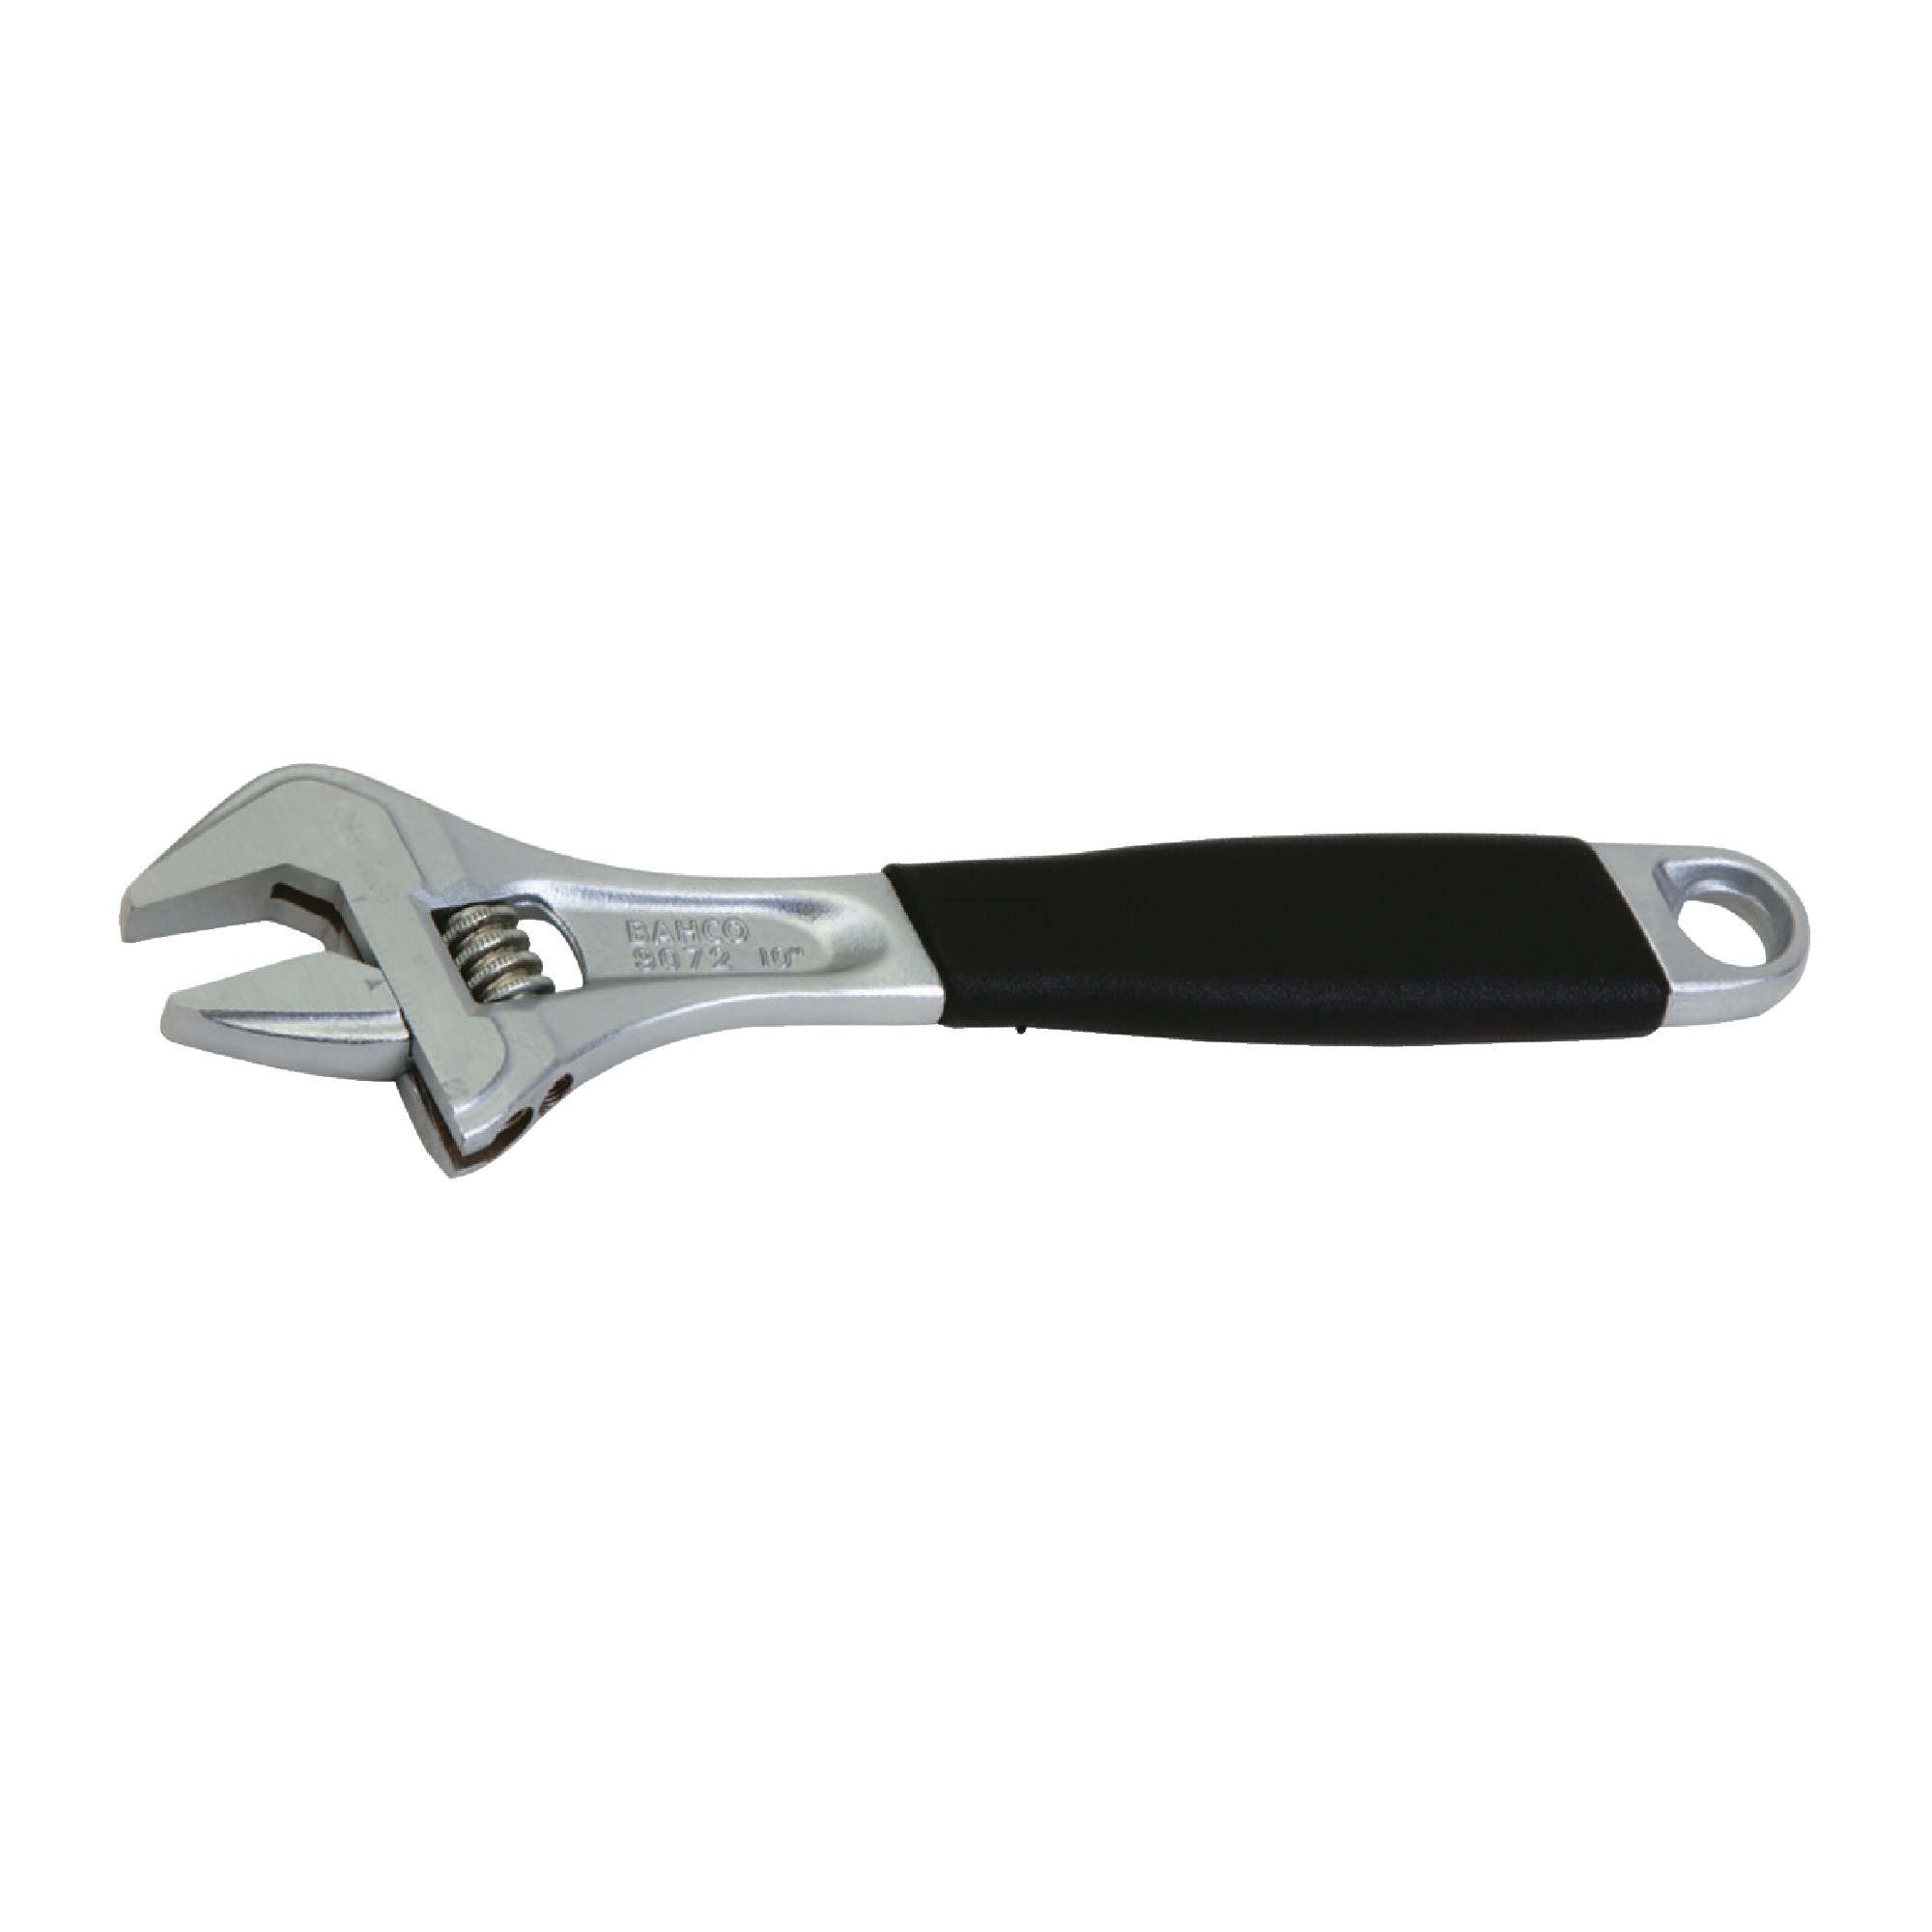 9070 R US 3/4" Adjustable Wrench With Black Phosphate Finish Finish